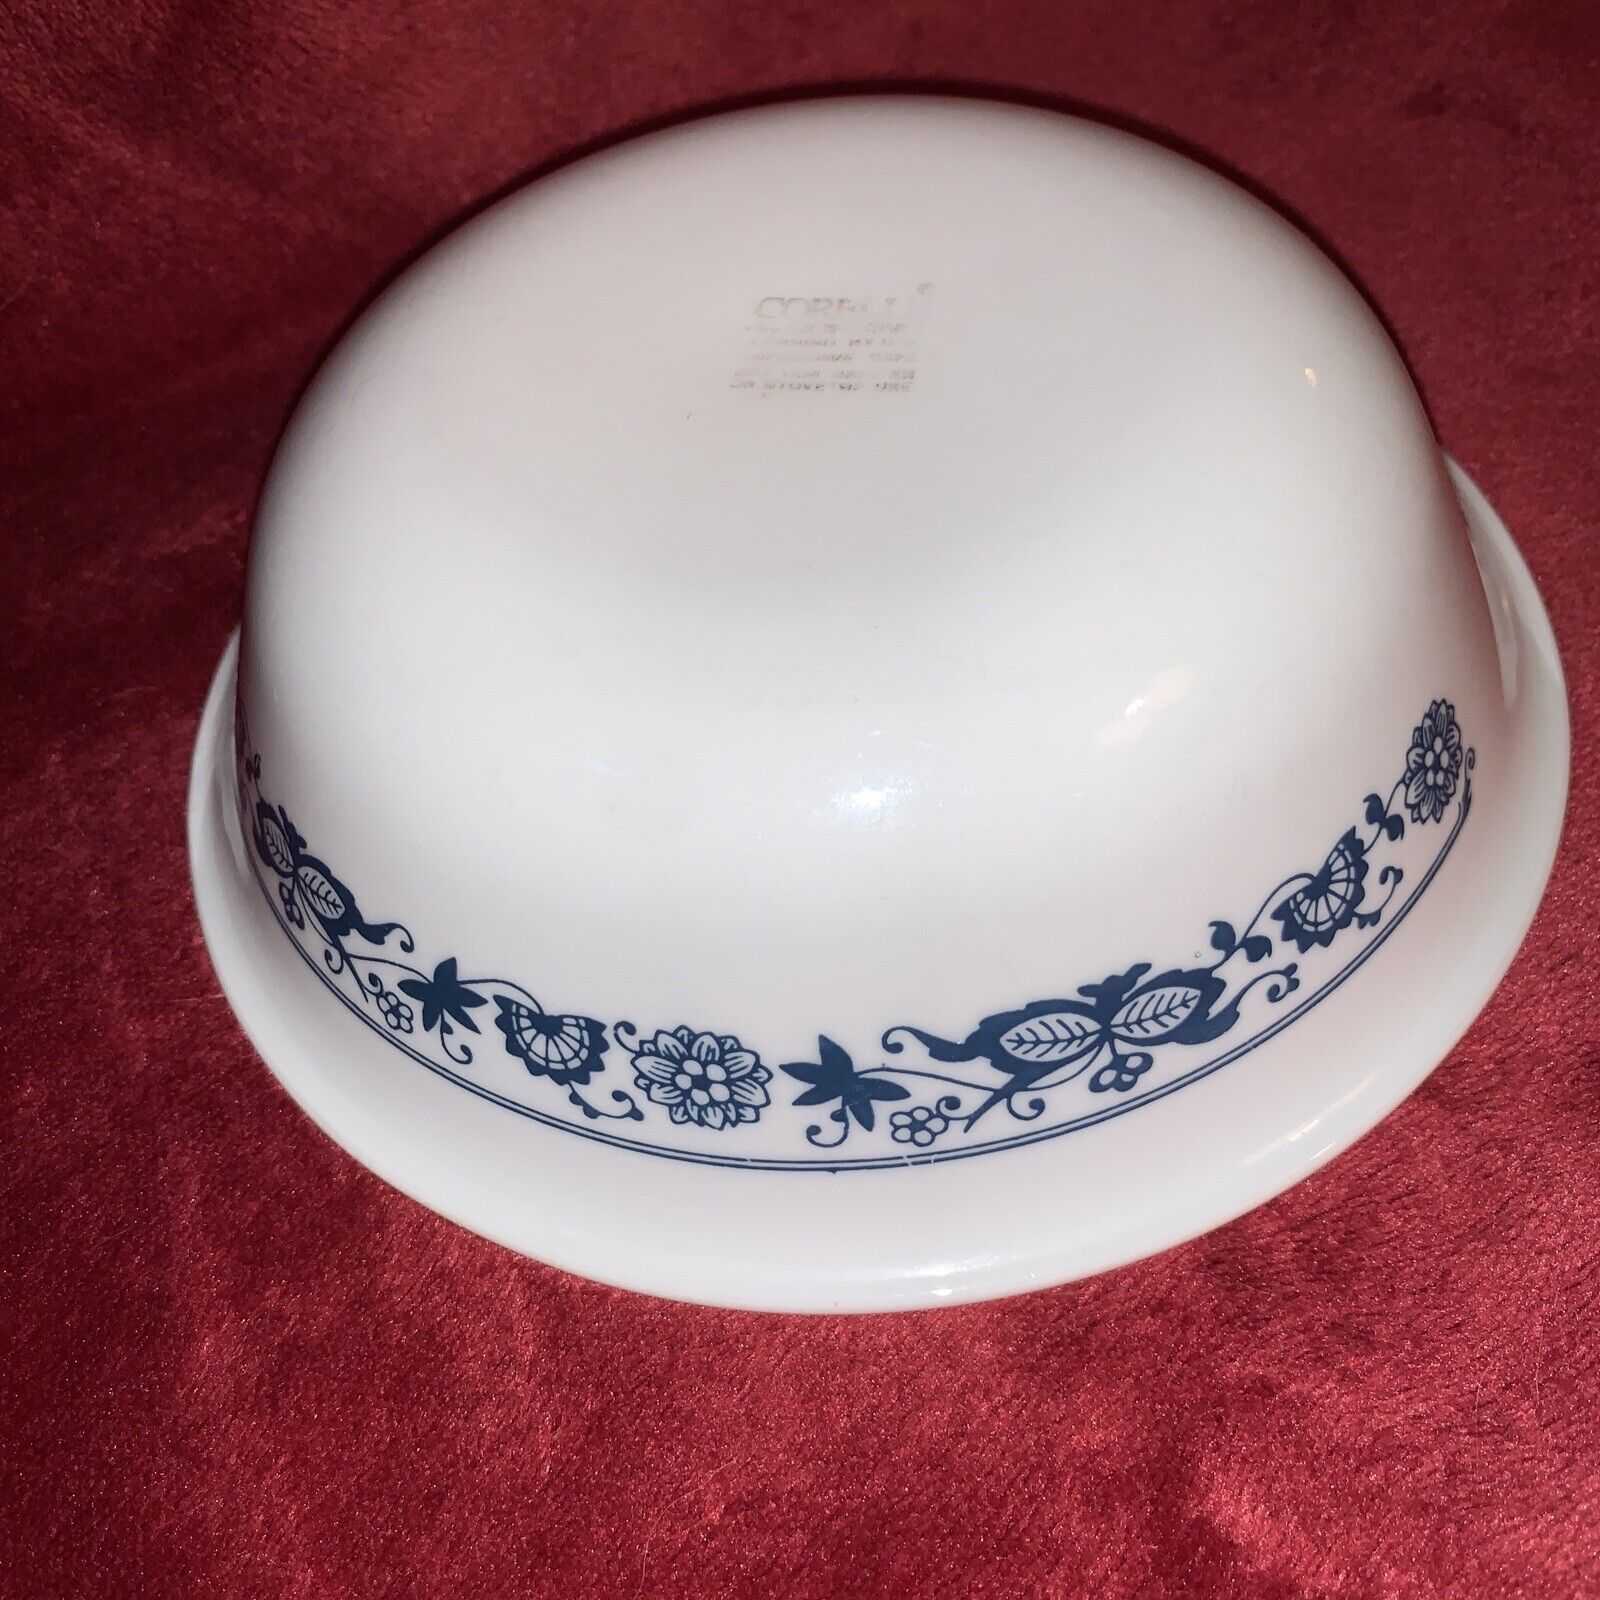 Single Corning Corelle Old Town Blue Onion Cereal or Soup Bowl